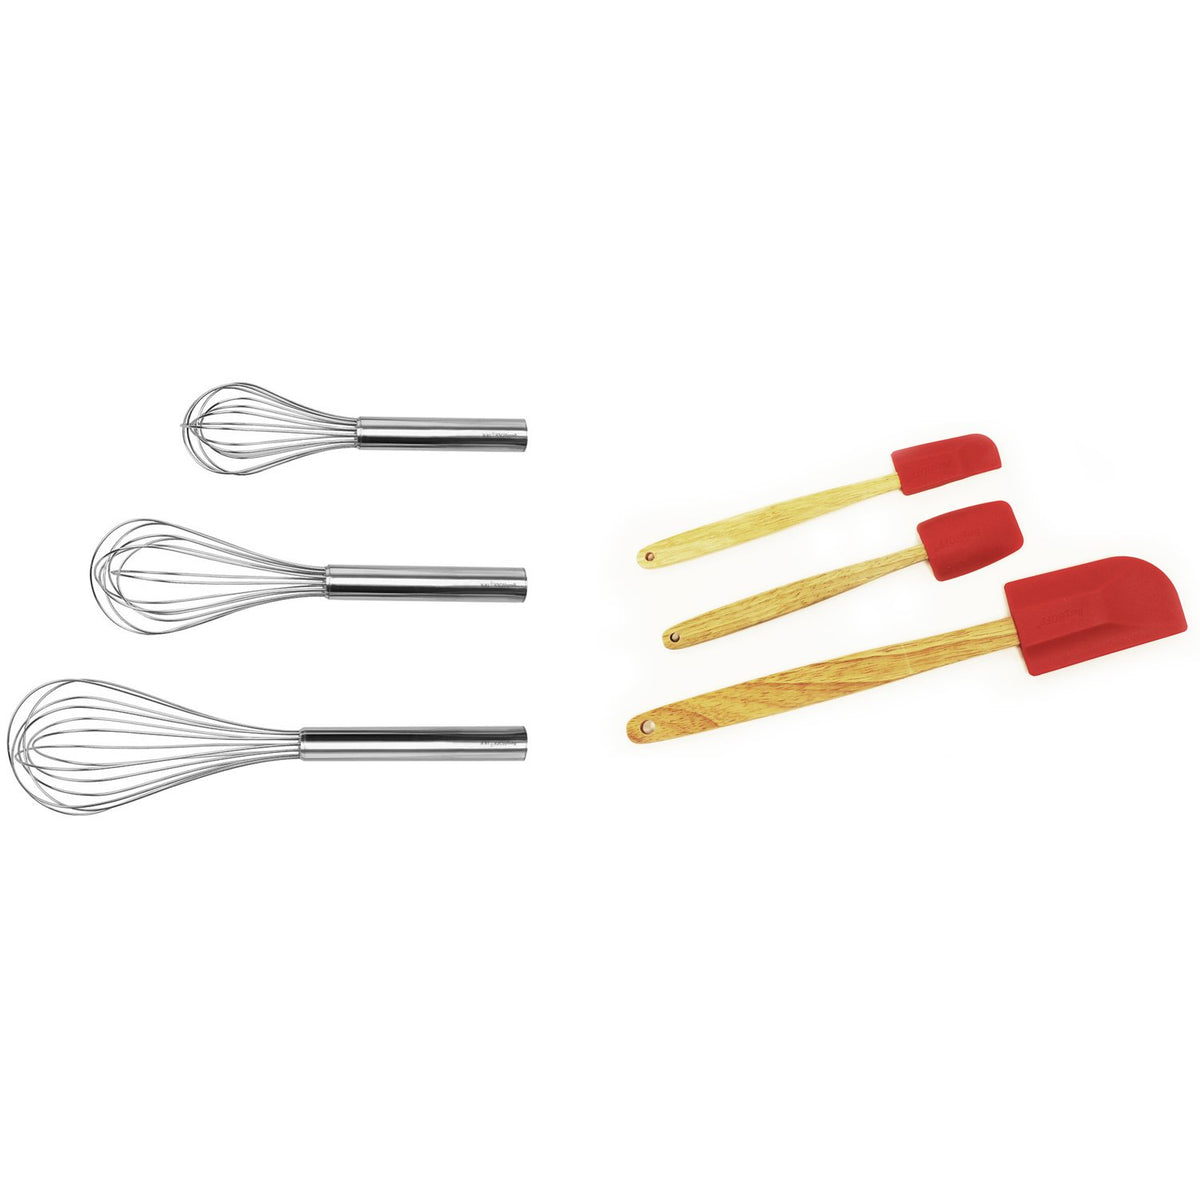 1, 2, & 4 cup Silicone Measuring Cups - Whisk